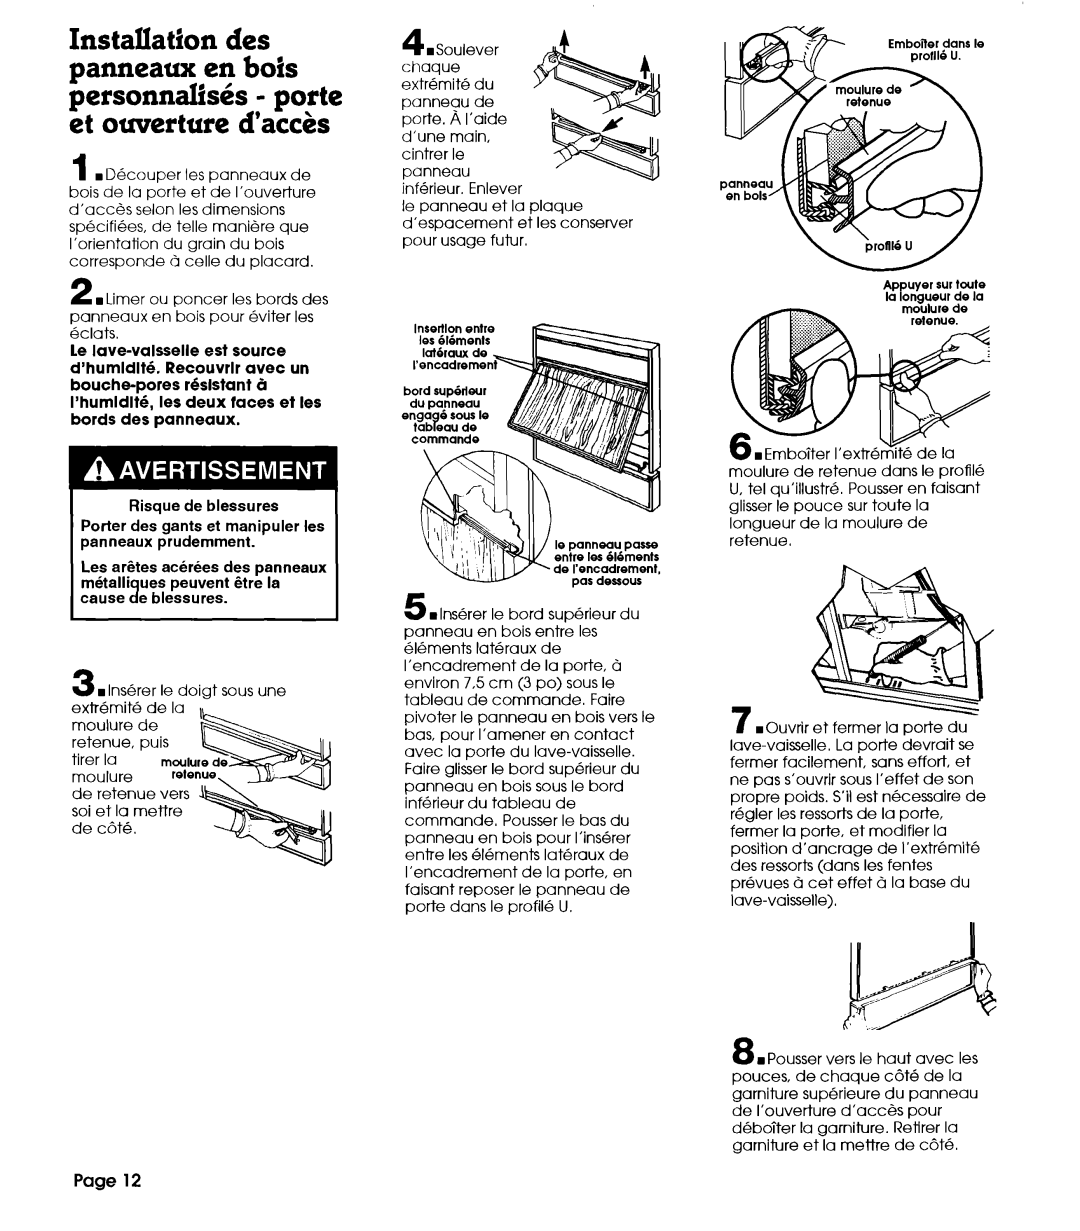 Whirlpool 801 installation instructions Page, Risque de blessures 